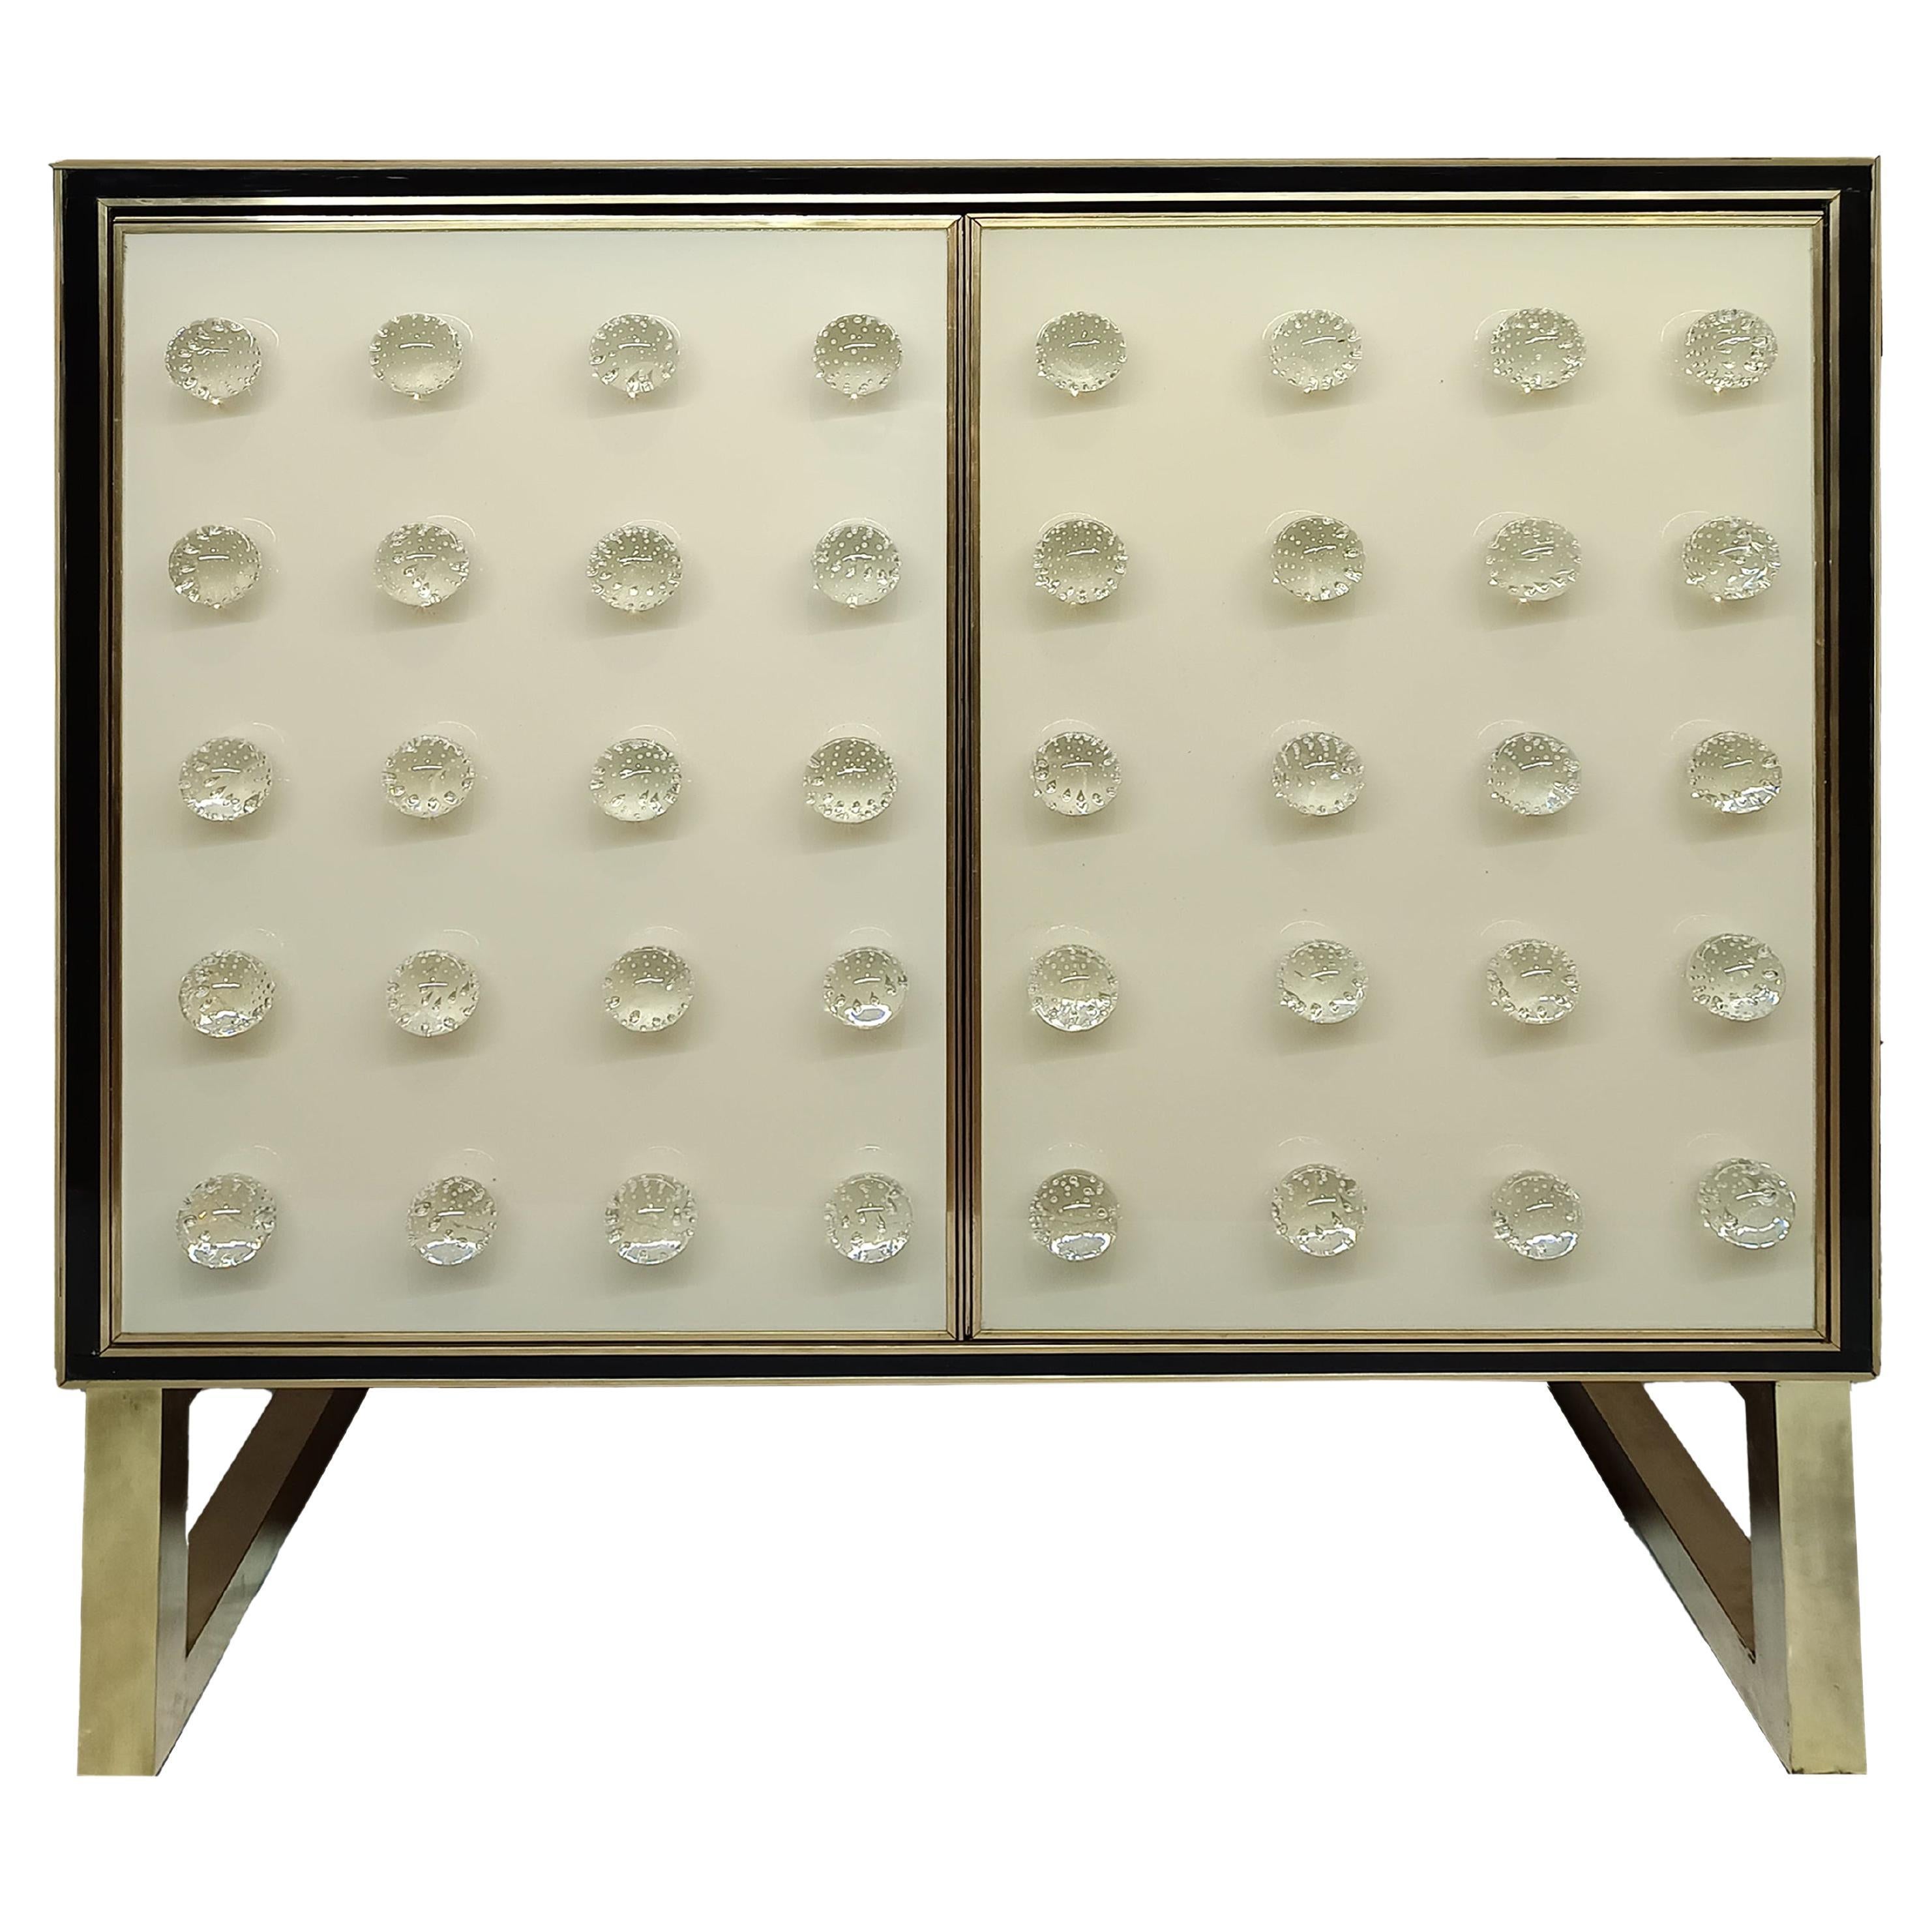 Spectacular White & Black Cabinet in Murano Glass Made in Italy Available For Sale